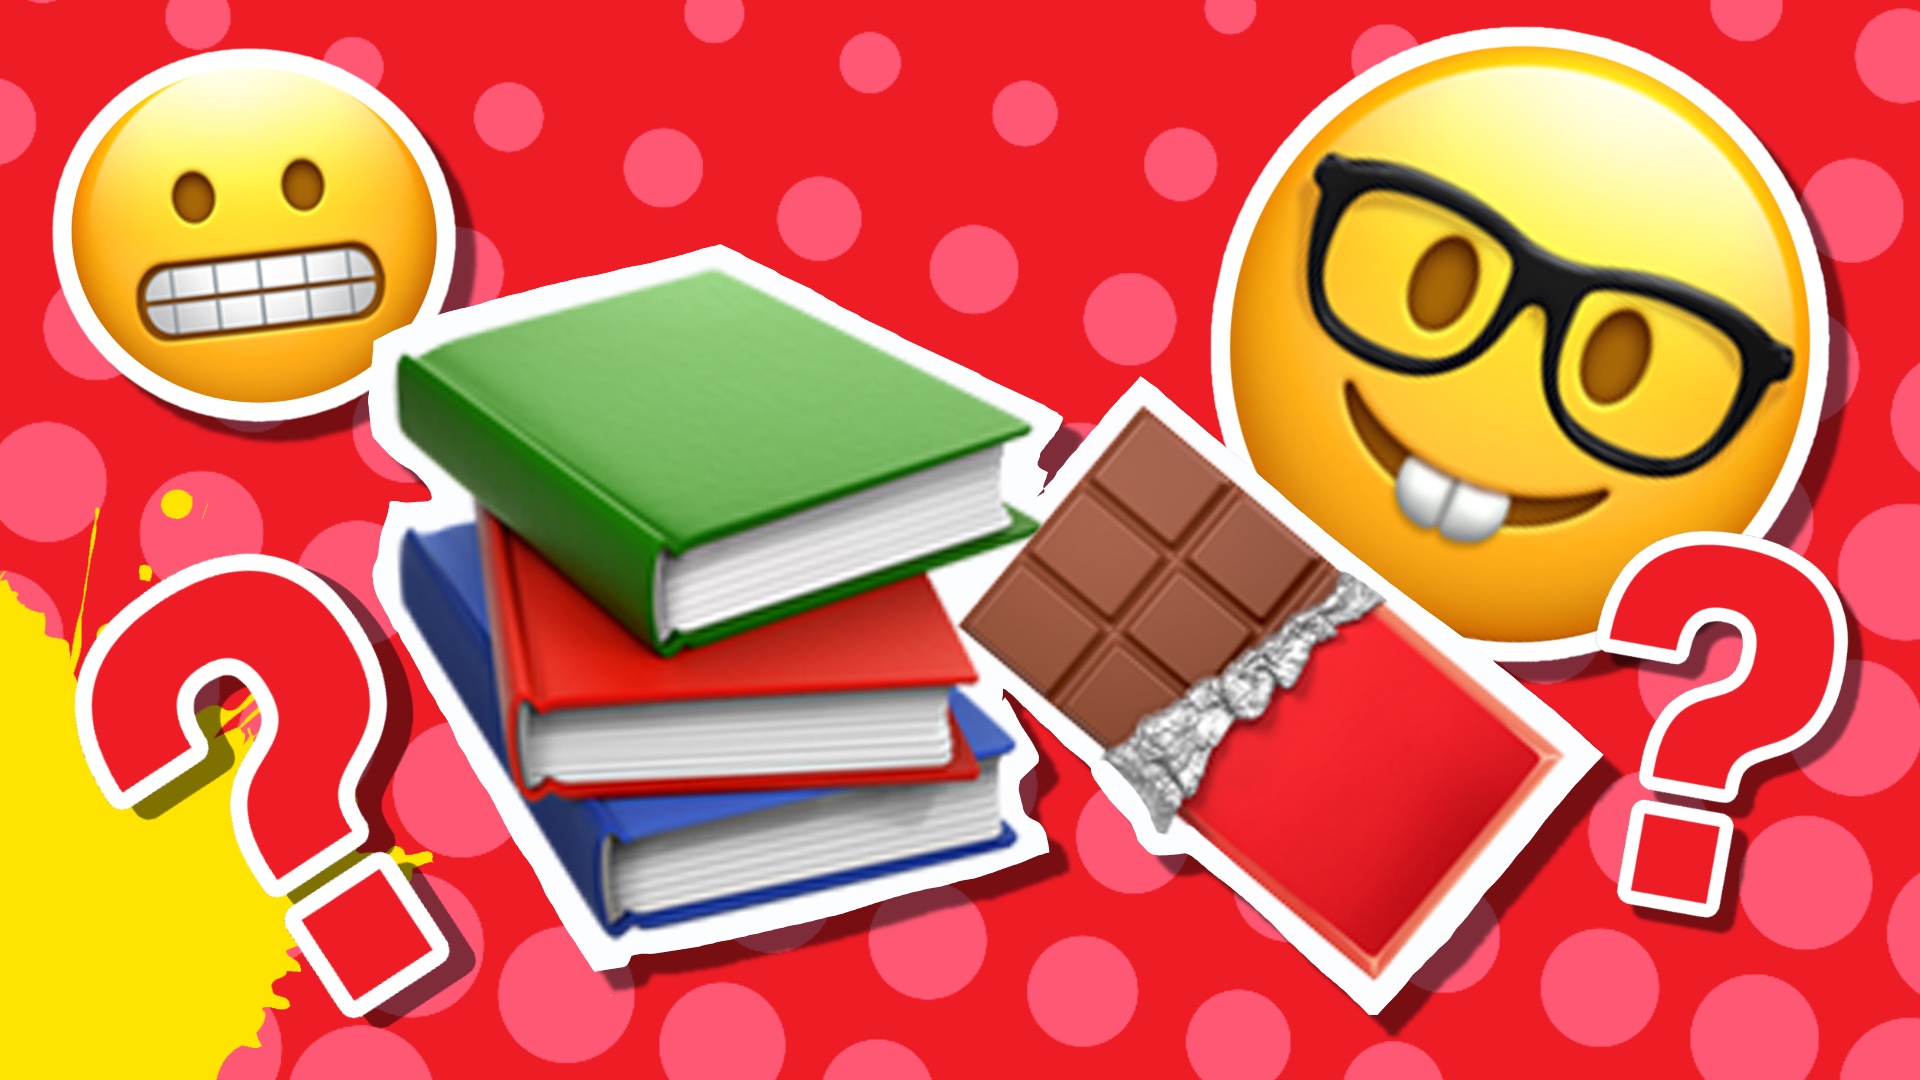 Guess the book from the emoji codes